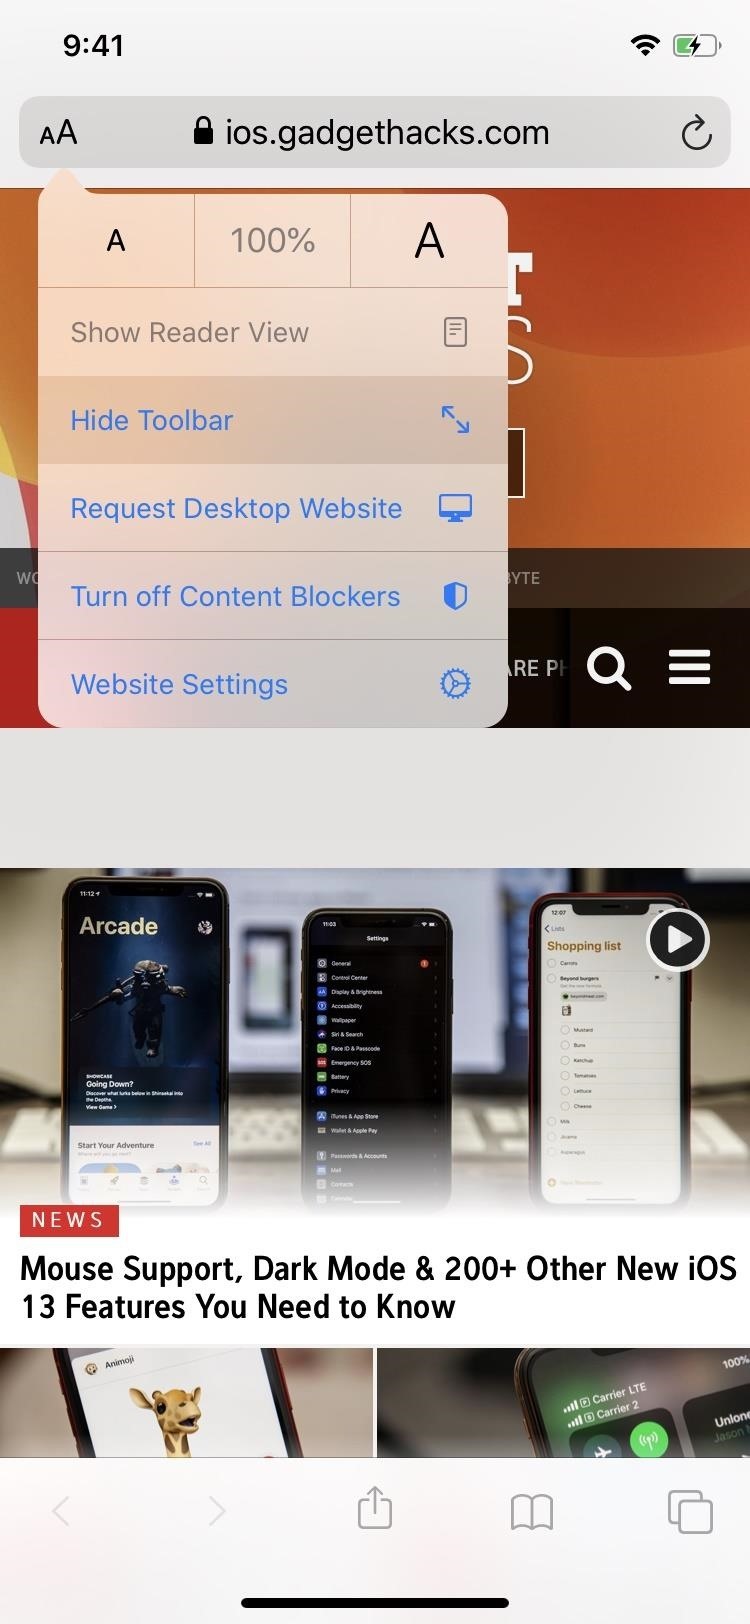 How to Keep Safari's Toolbars Hidden While Scrolling Webpages in iOS 13